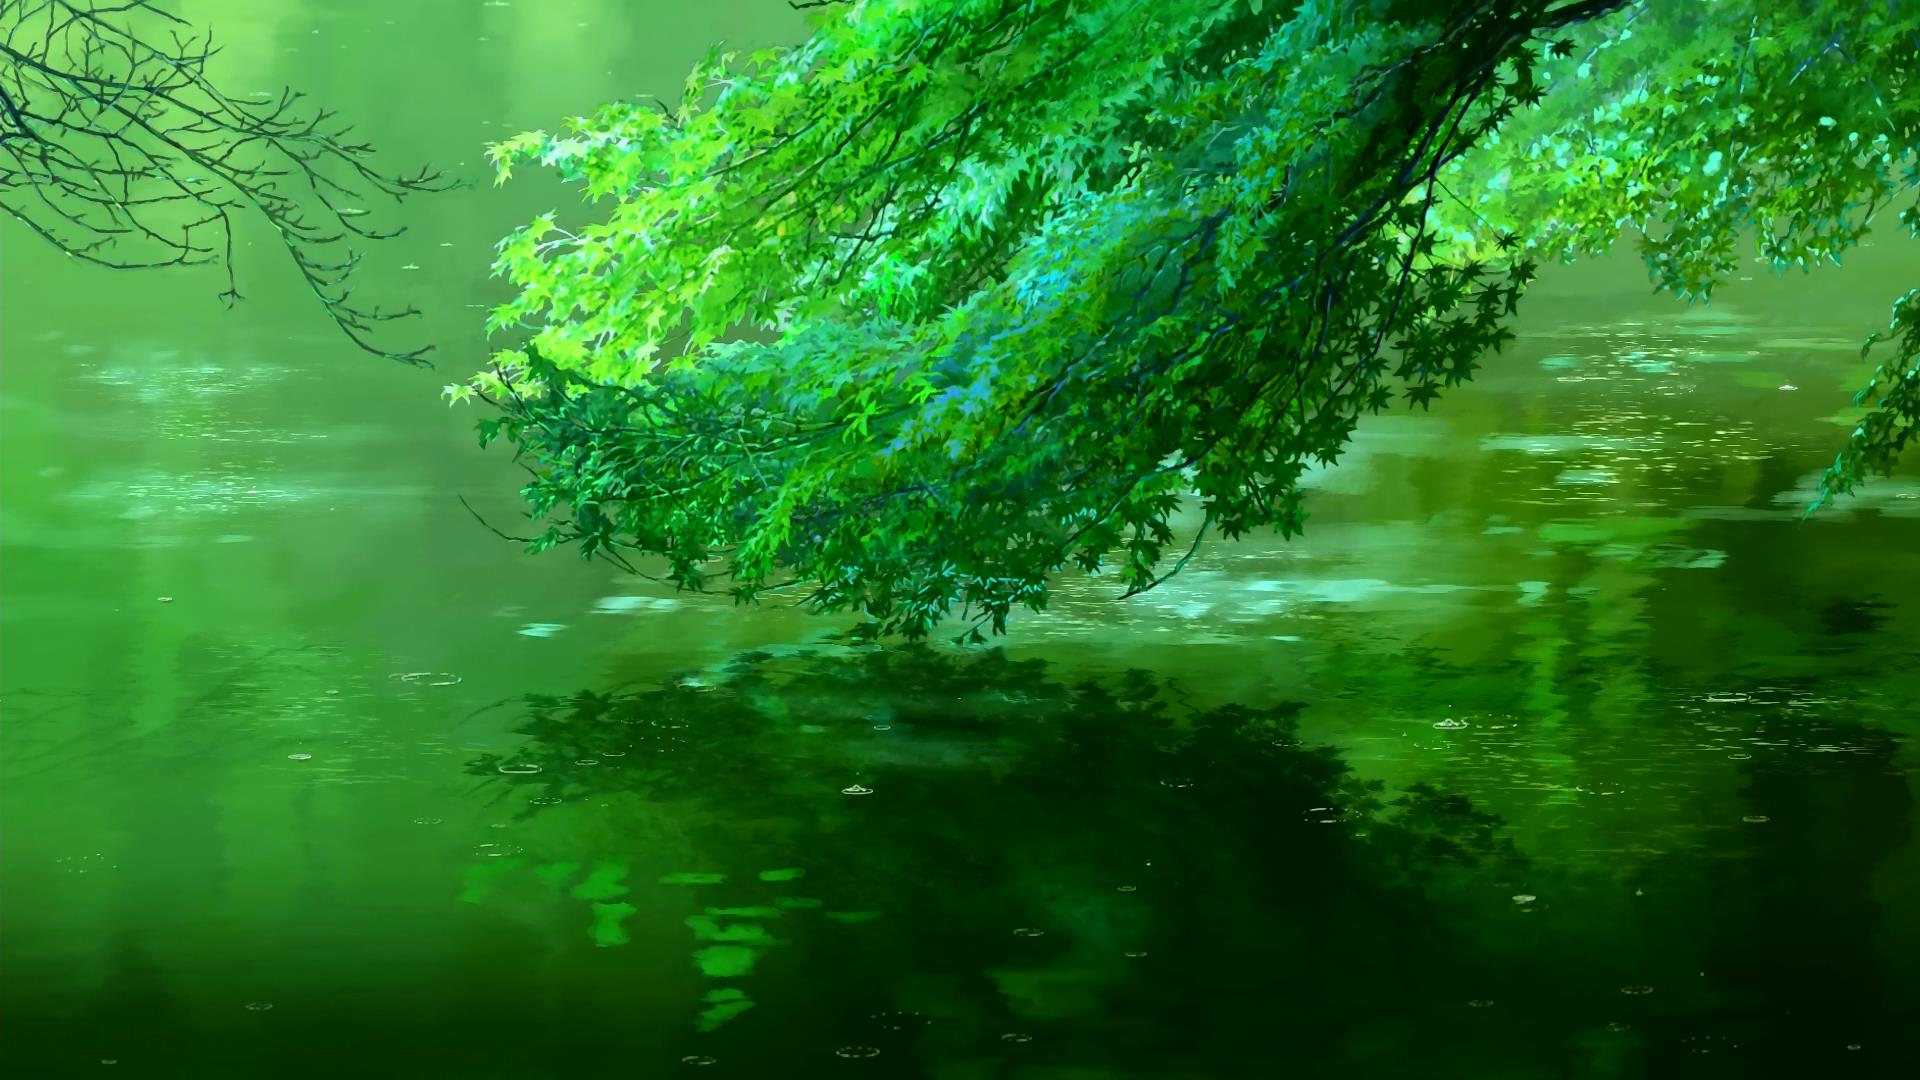 A green tree in the water - Garden